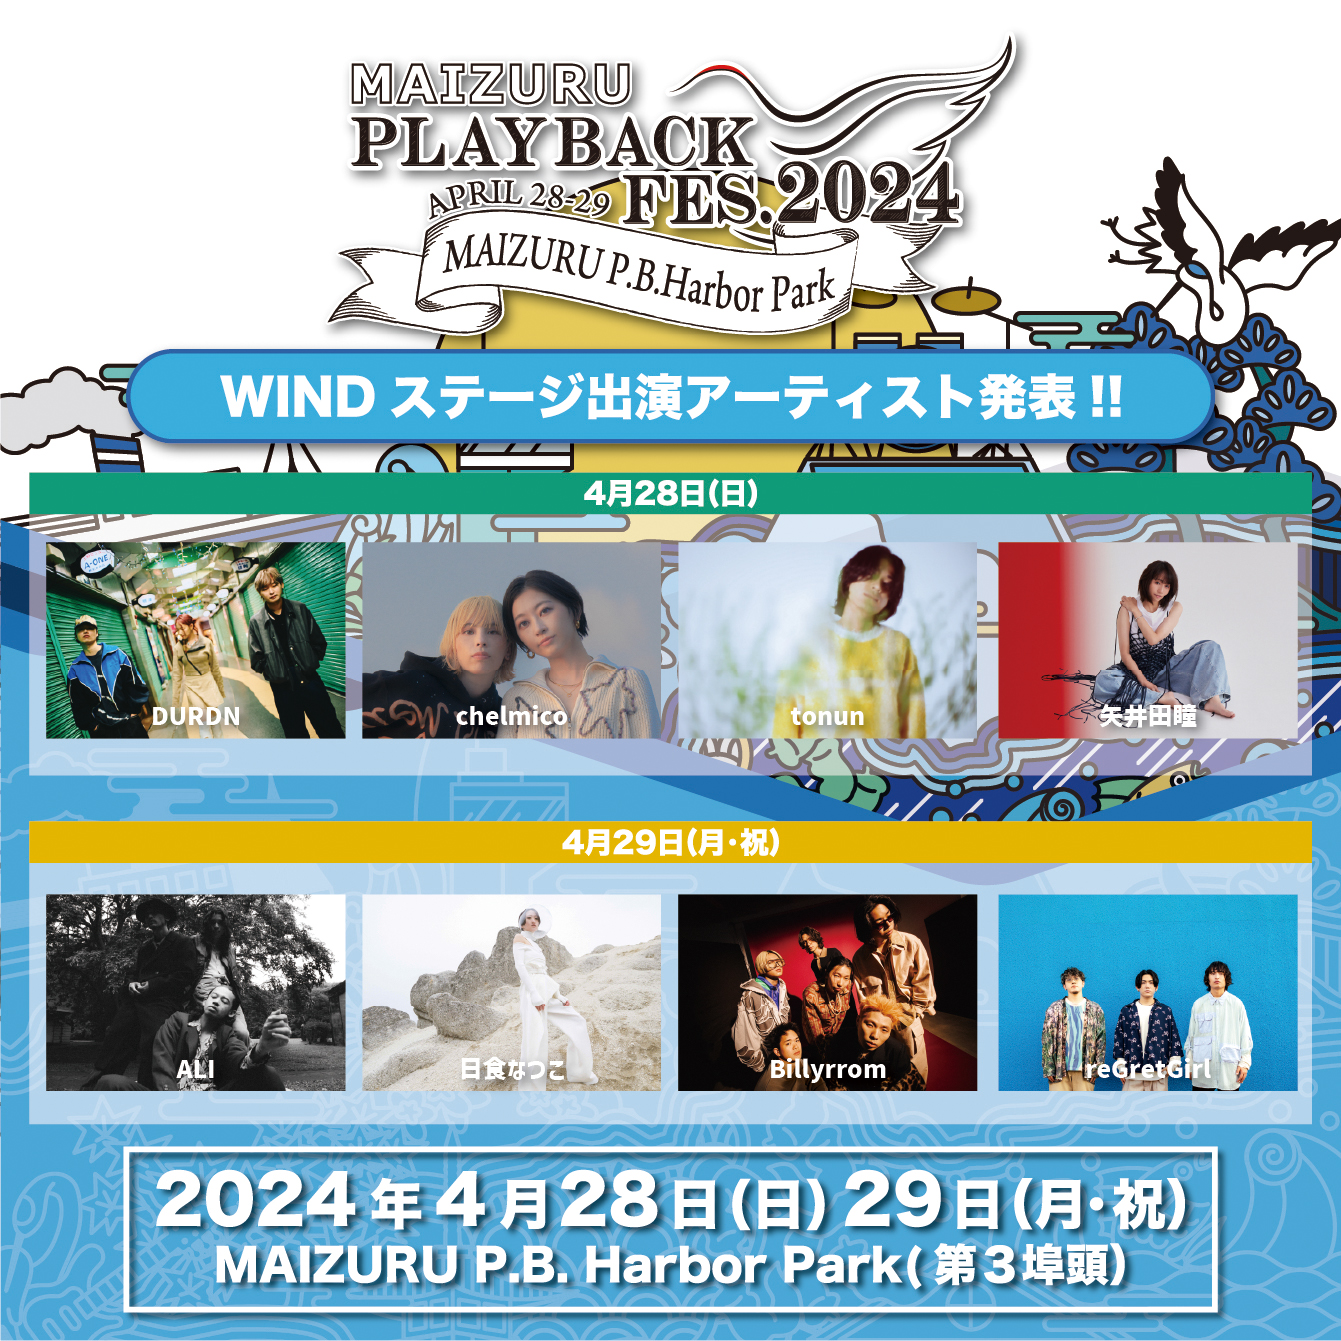 Wind Stageに出演の全アーティスト発表！！